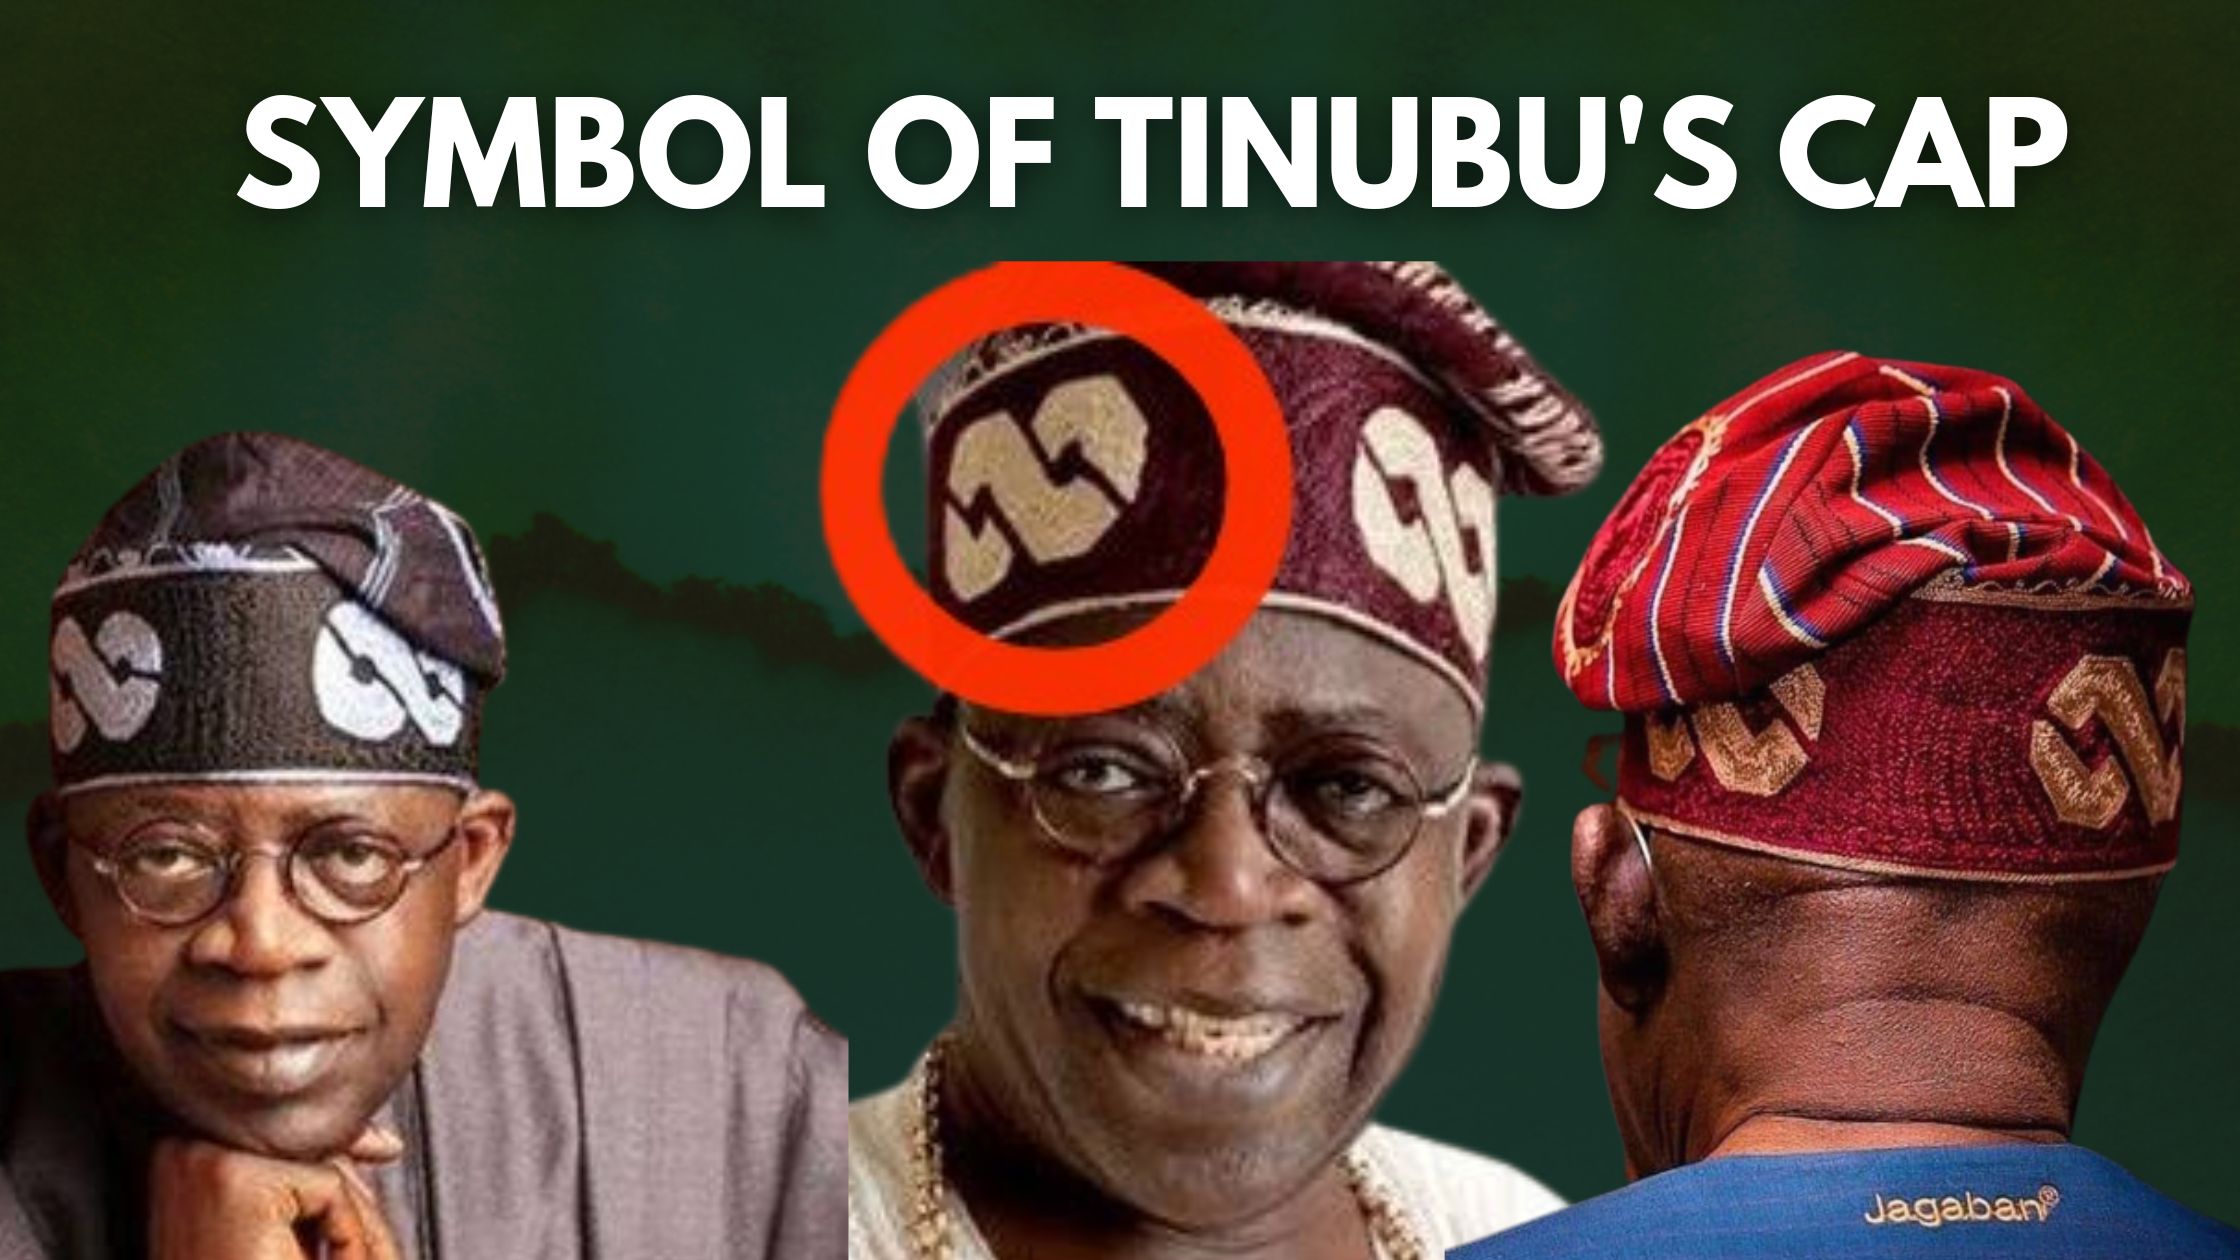 See the meaning of the symbol in Tinubu's cap